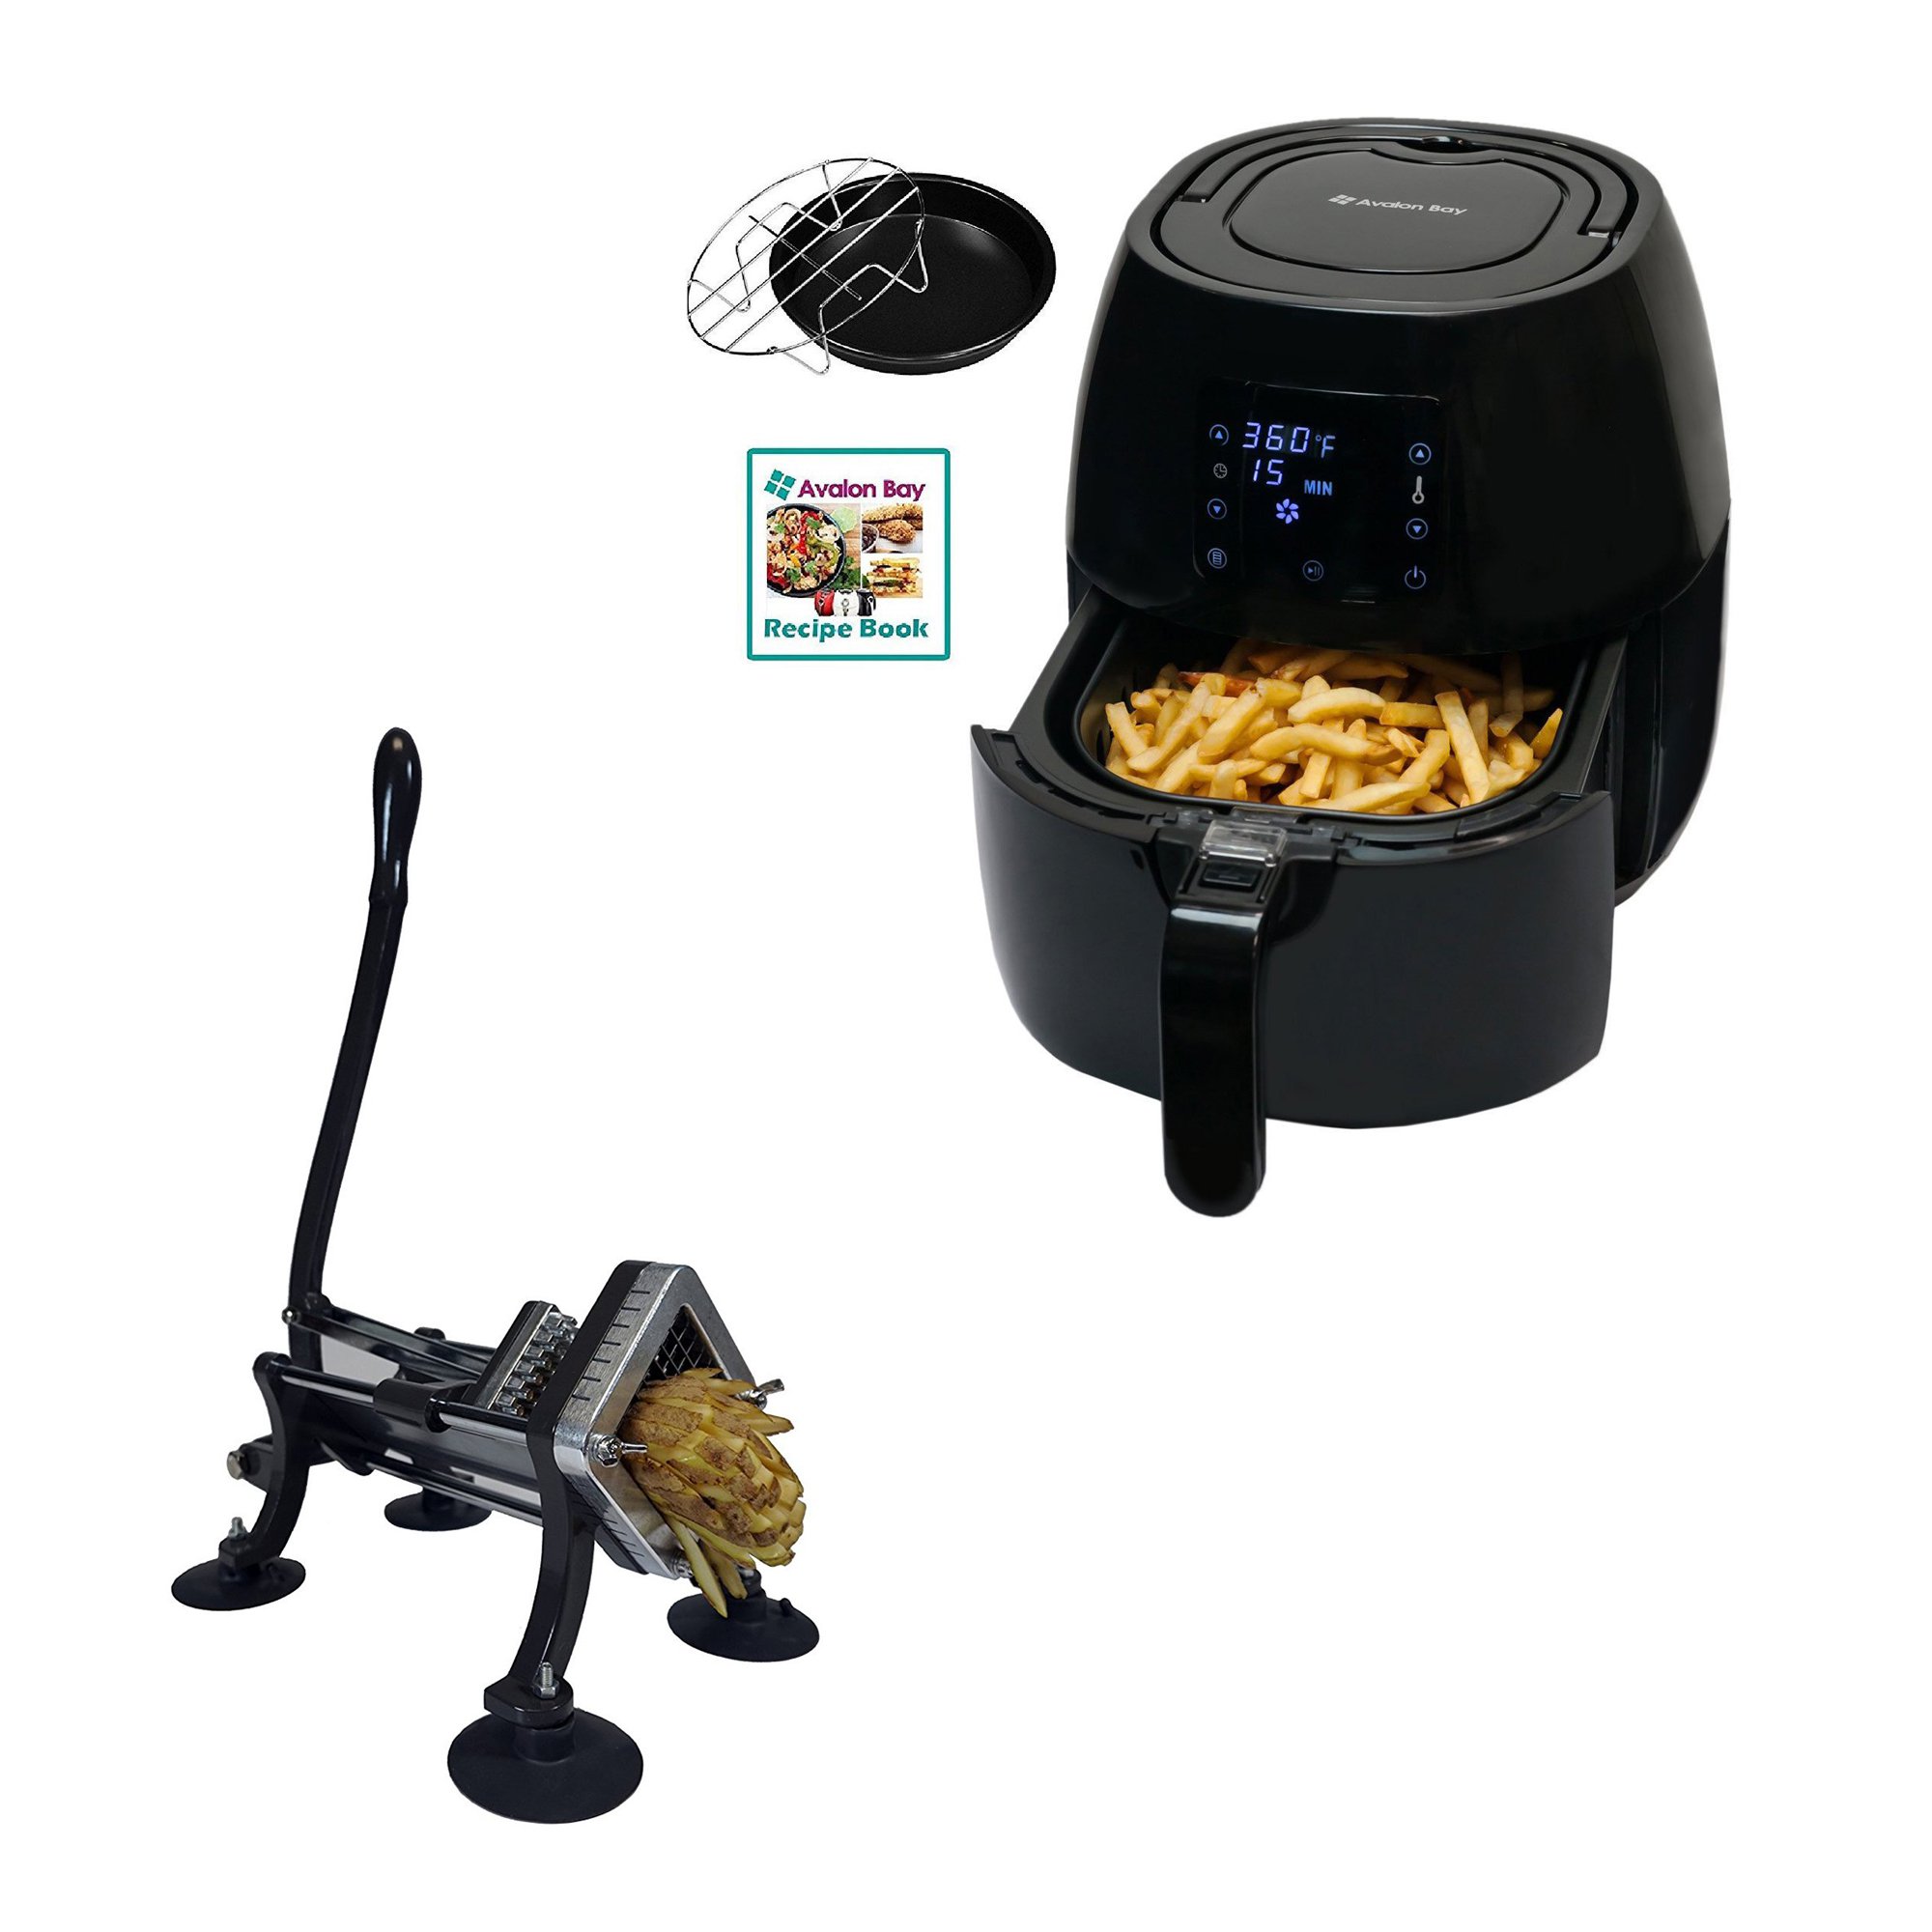  220v Air Fryer Household 3l/0.7 Gallon Multifunctional Oil-free  Electric Fryer Smart Air Fryer For Roasting,Baking-green : Home & Kitchen